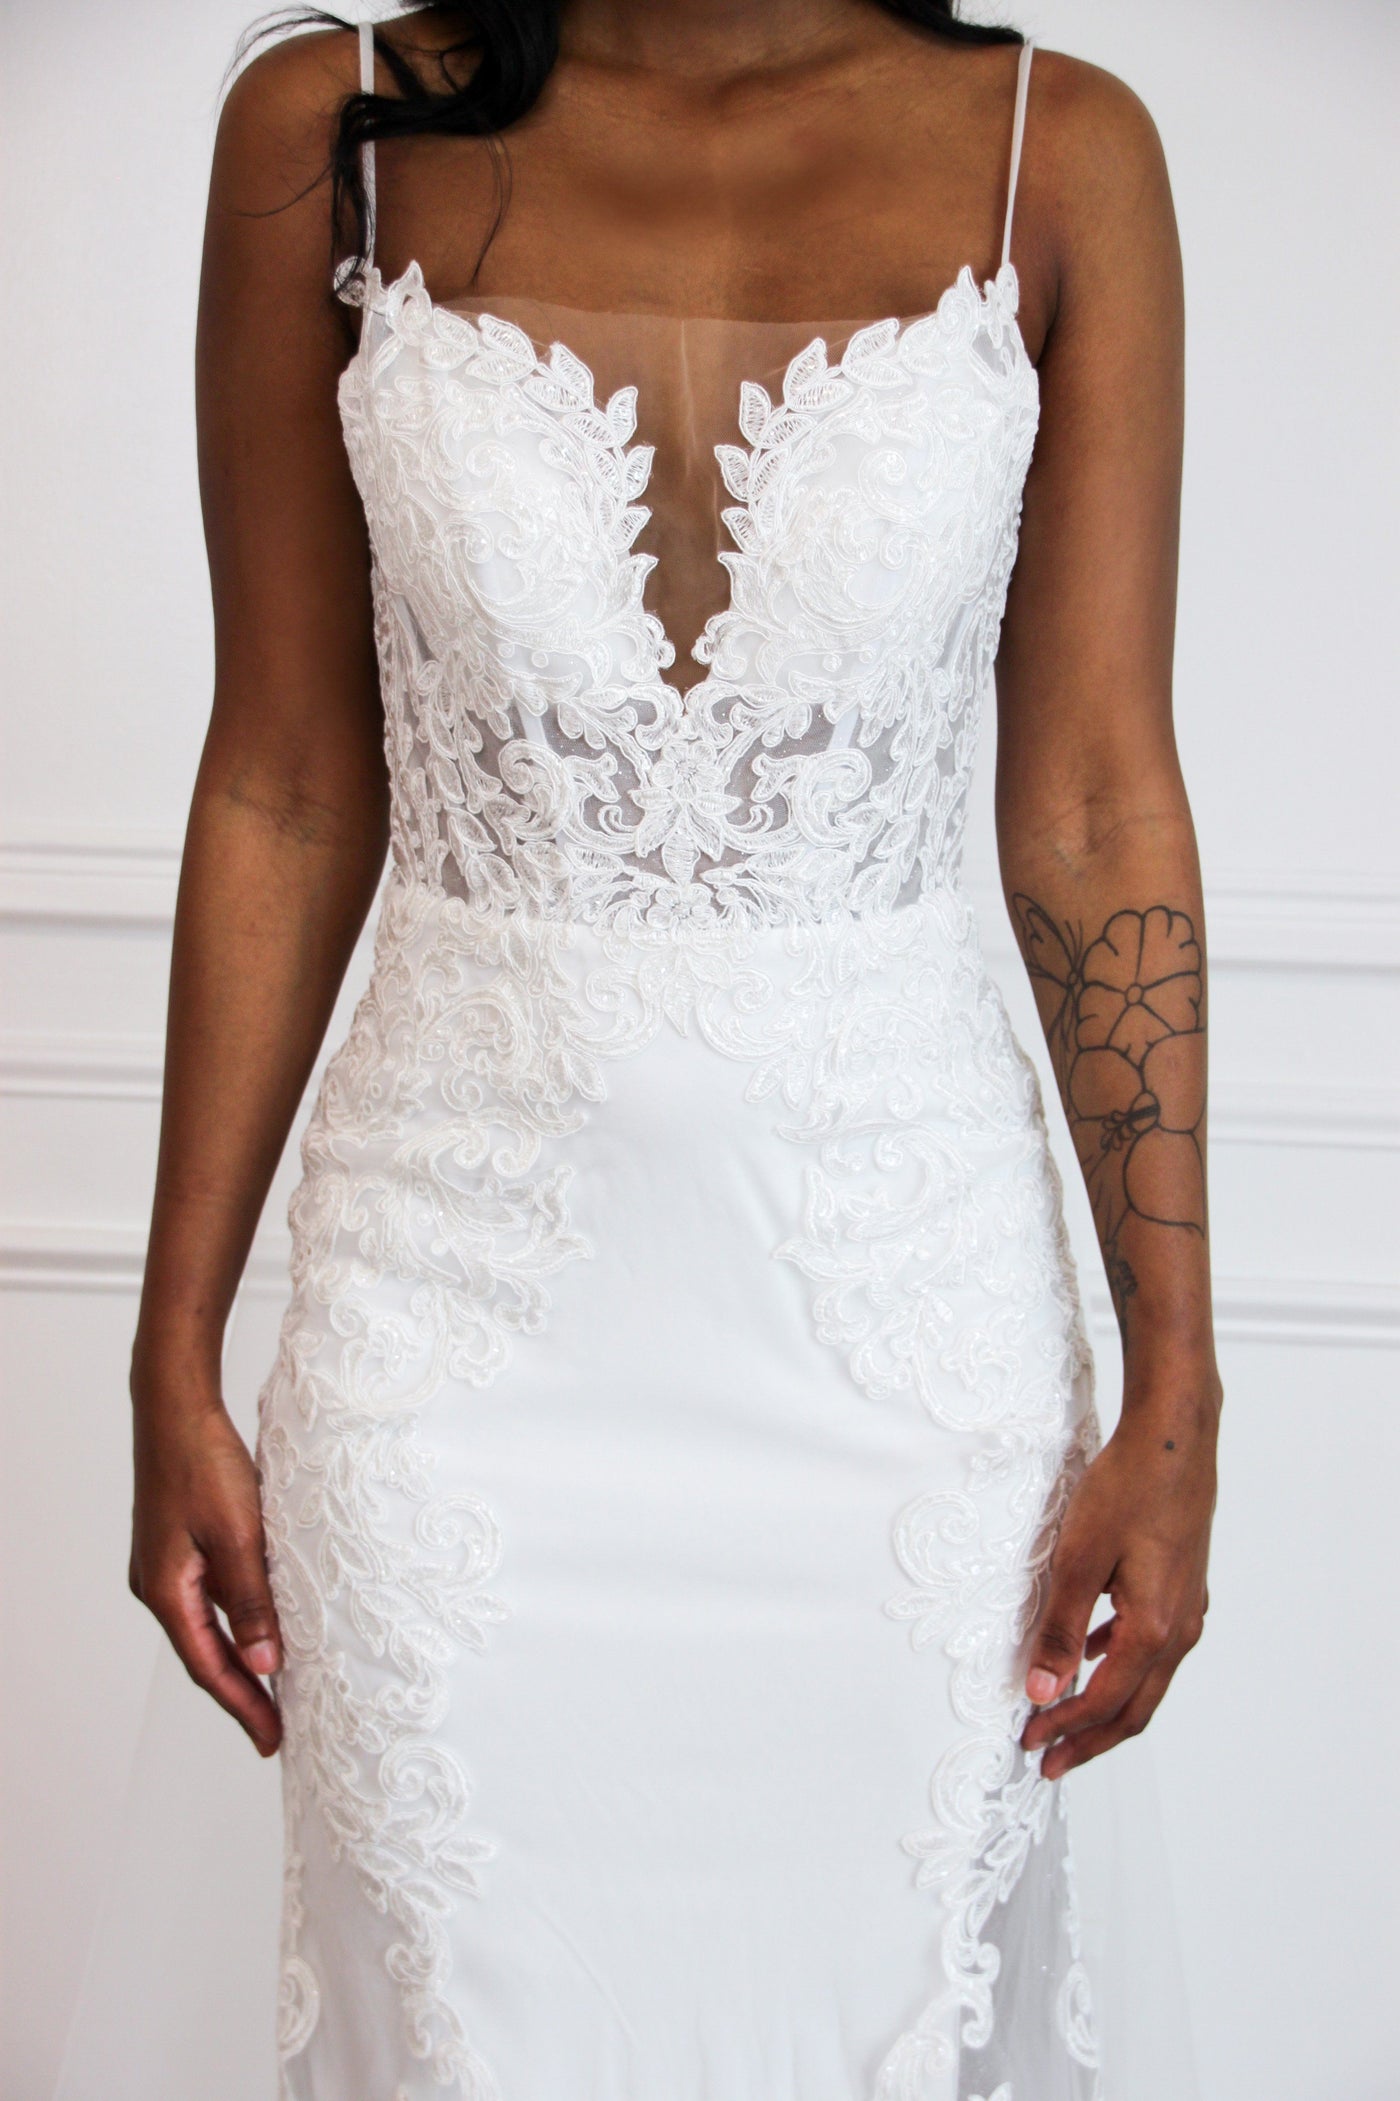 Ready For Romance Lace Wedding Dress: White - Bella and Bloom Boutique